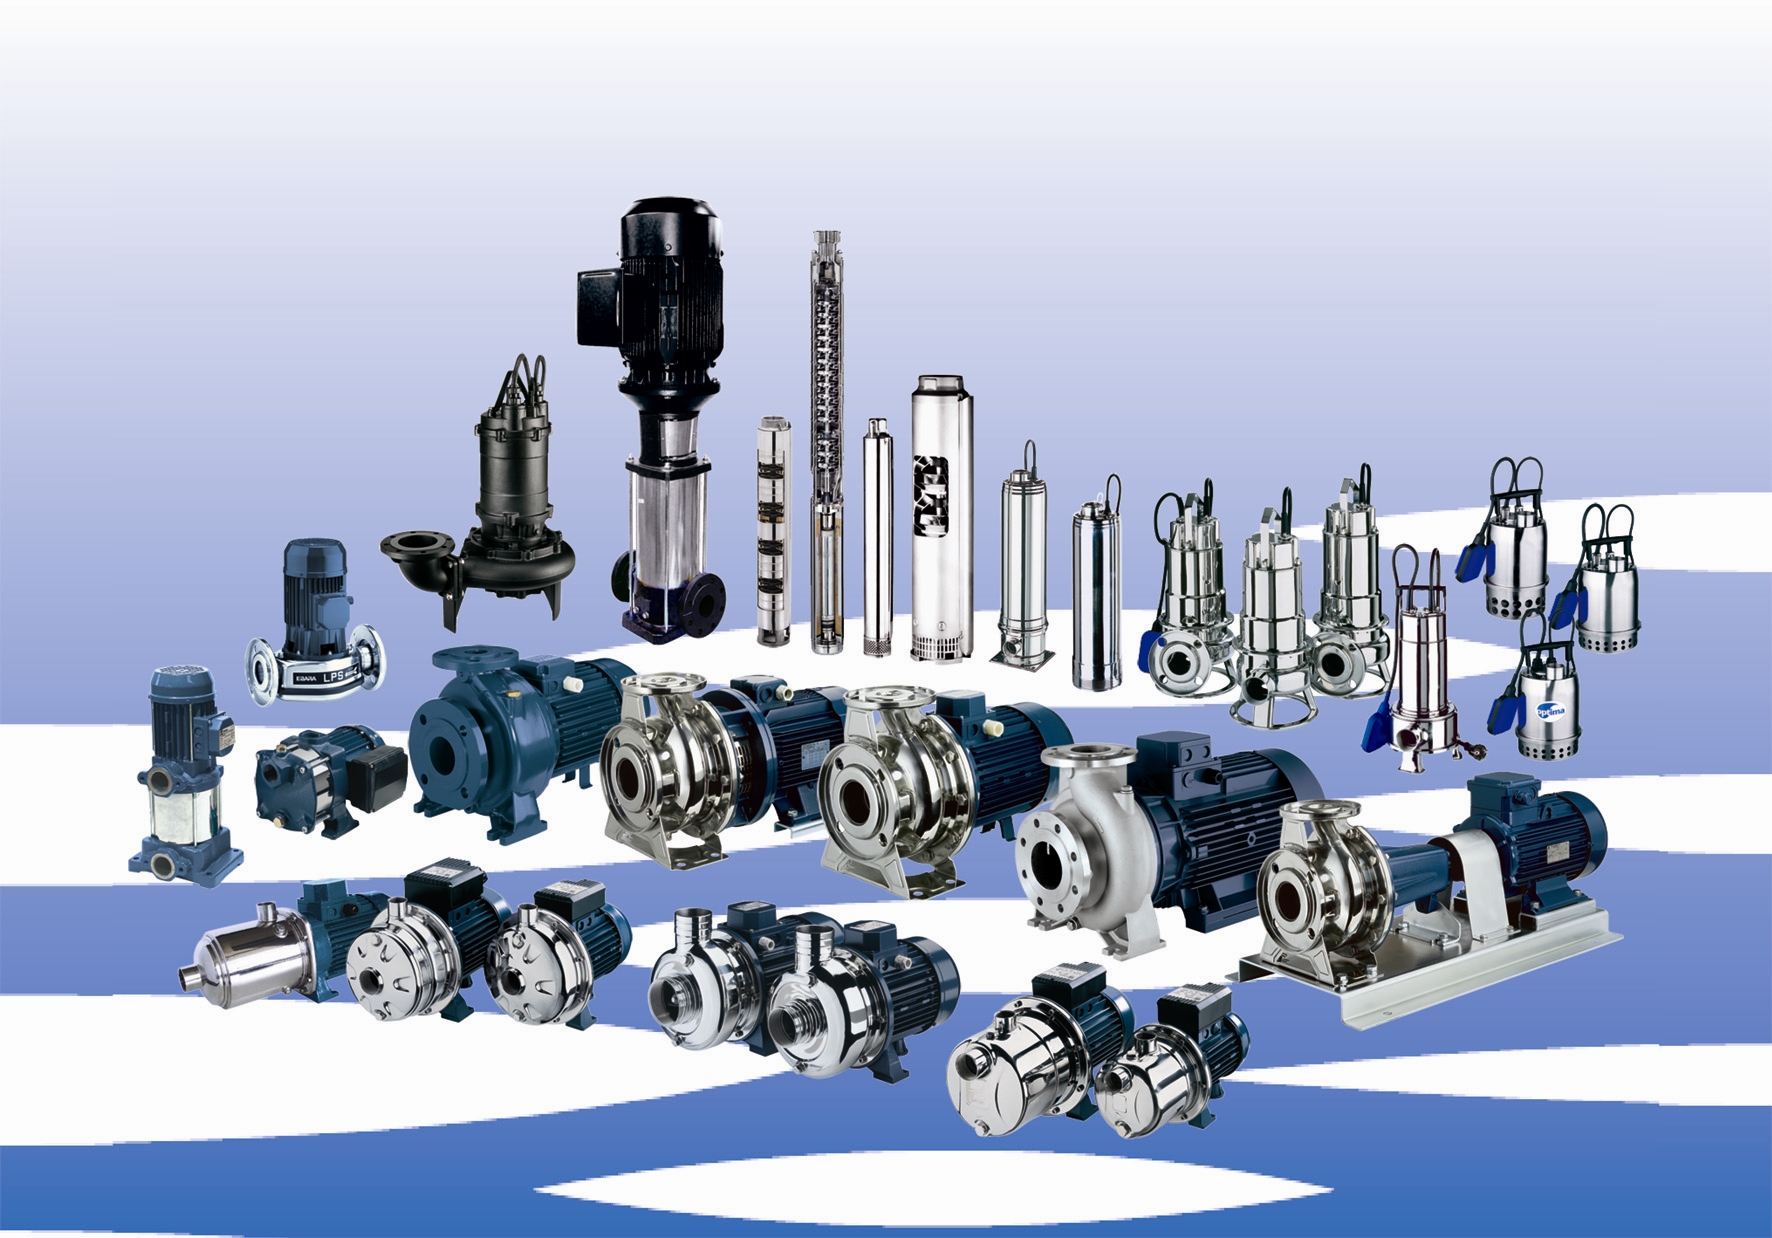 EBARA Pumps - Leading the way in precision fluid management